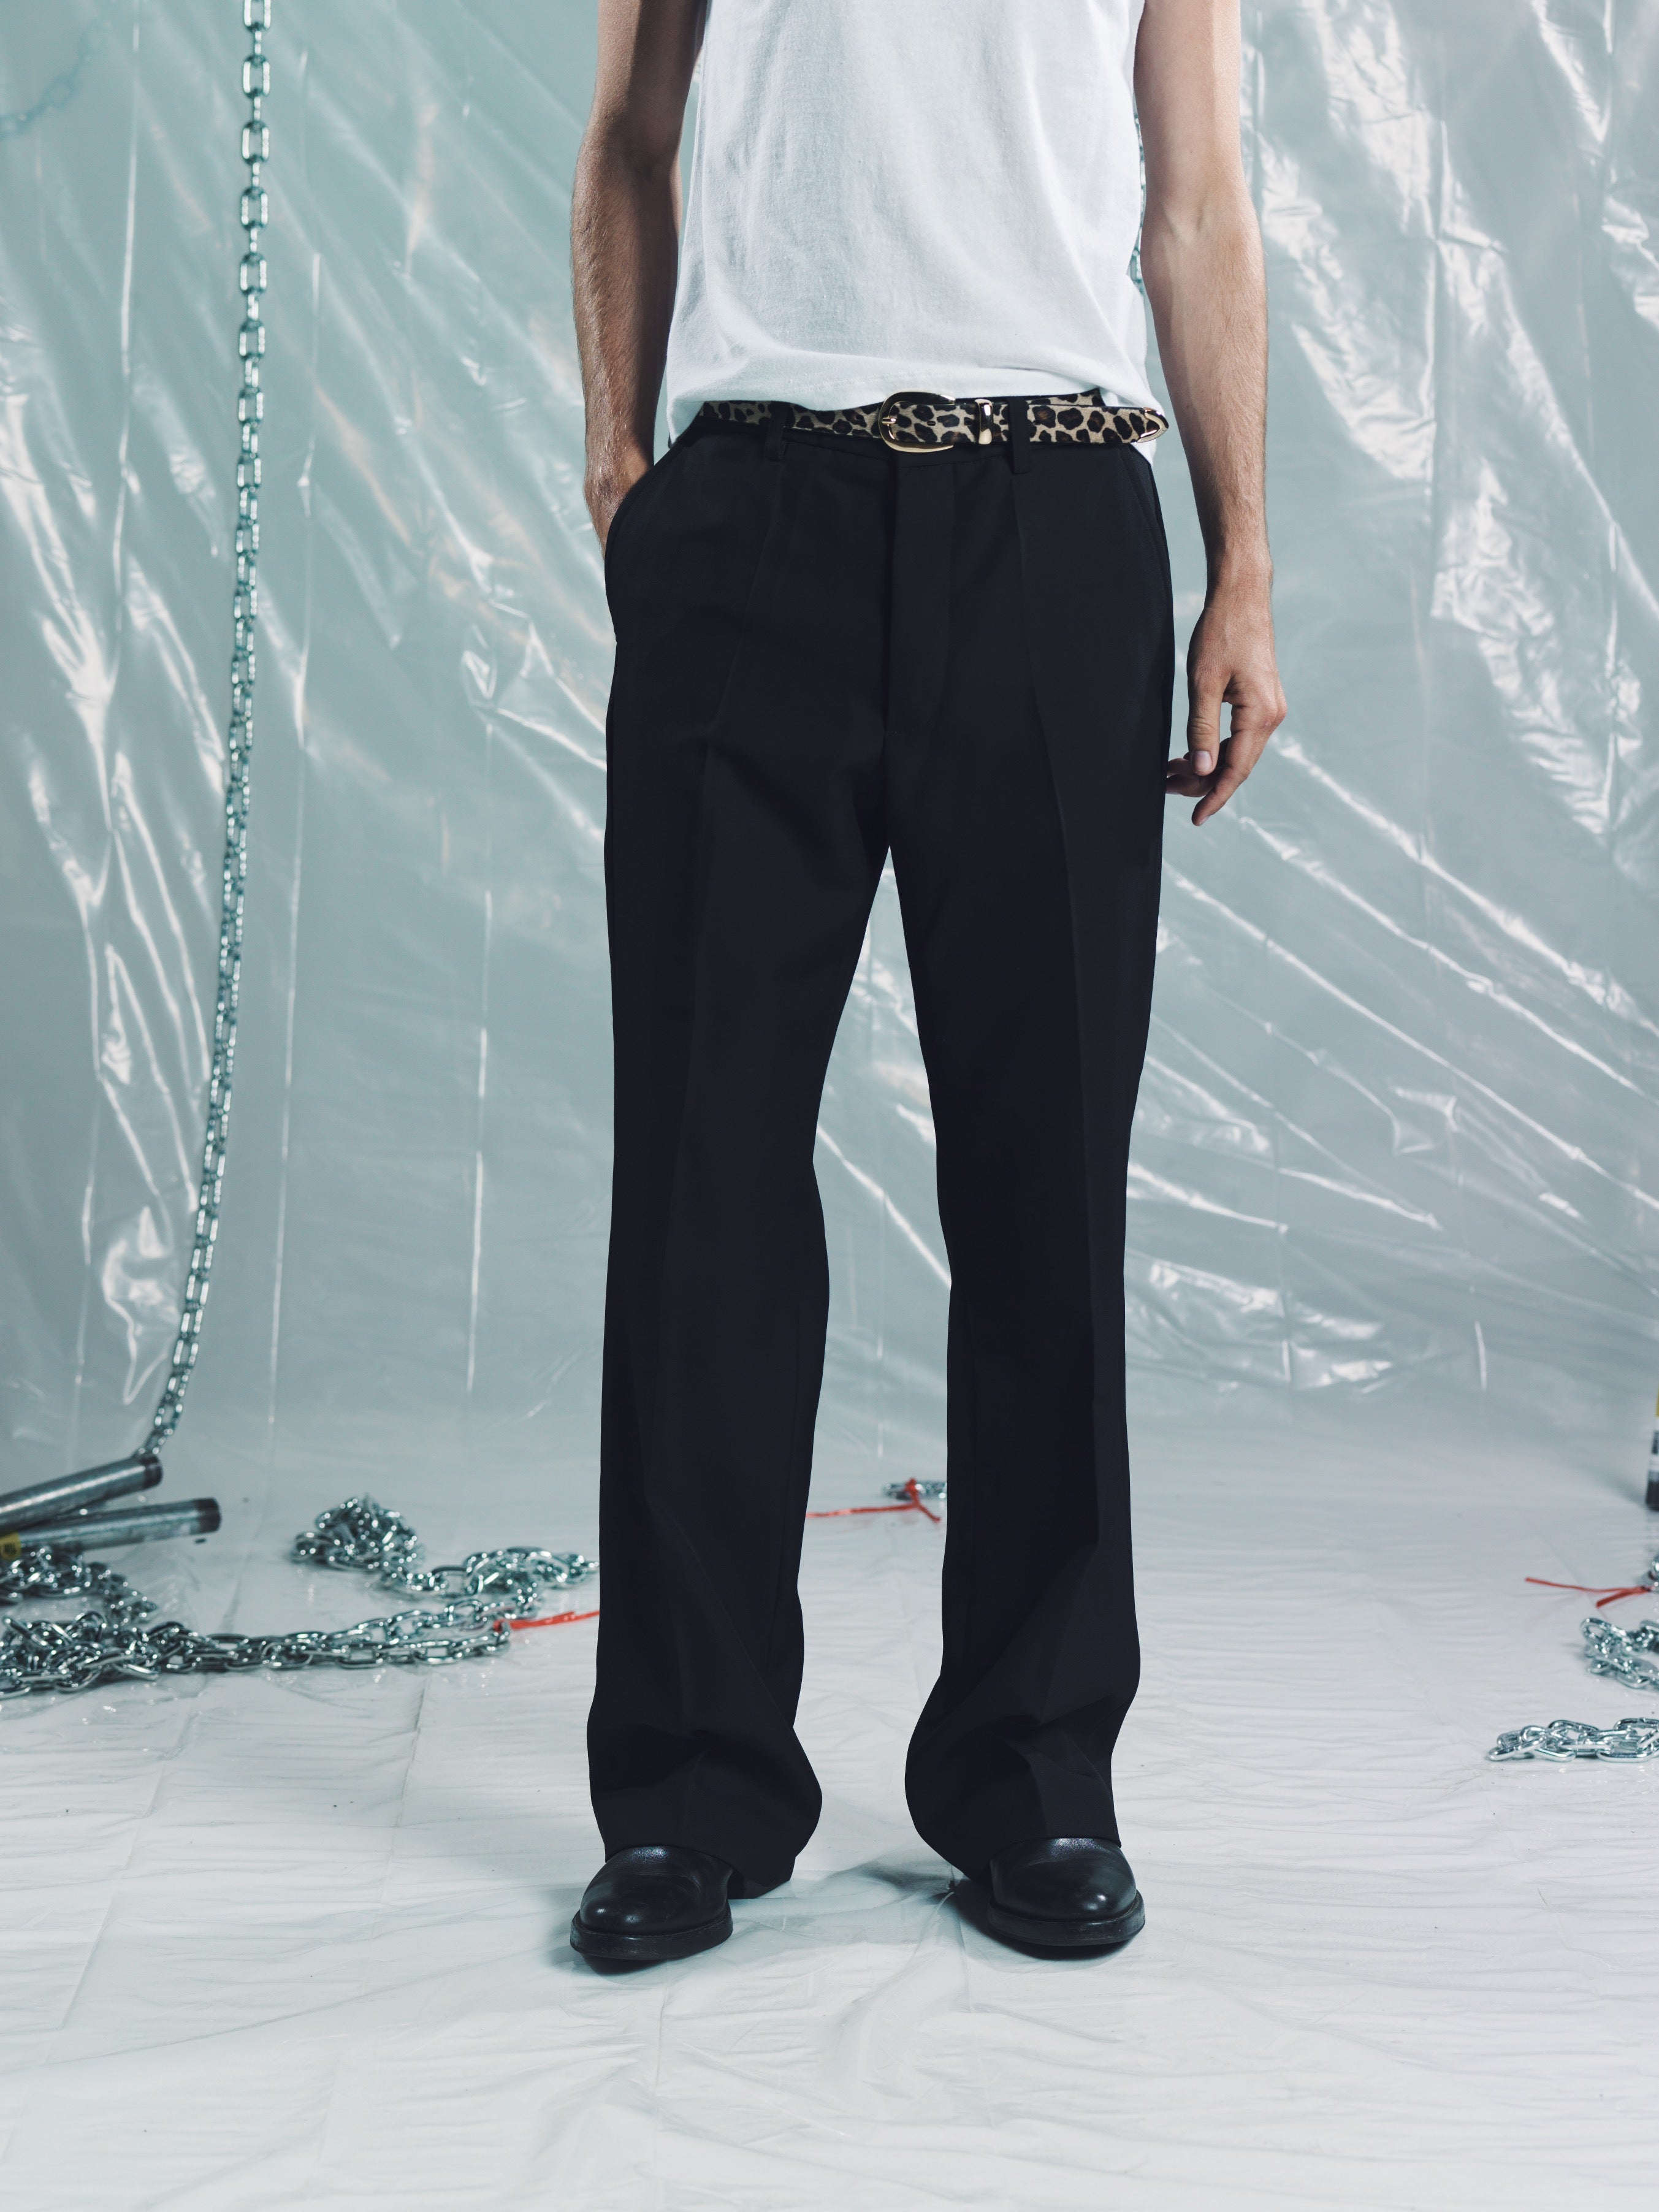 Trousers – SECOND/LAYER Inc.